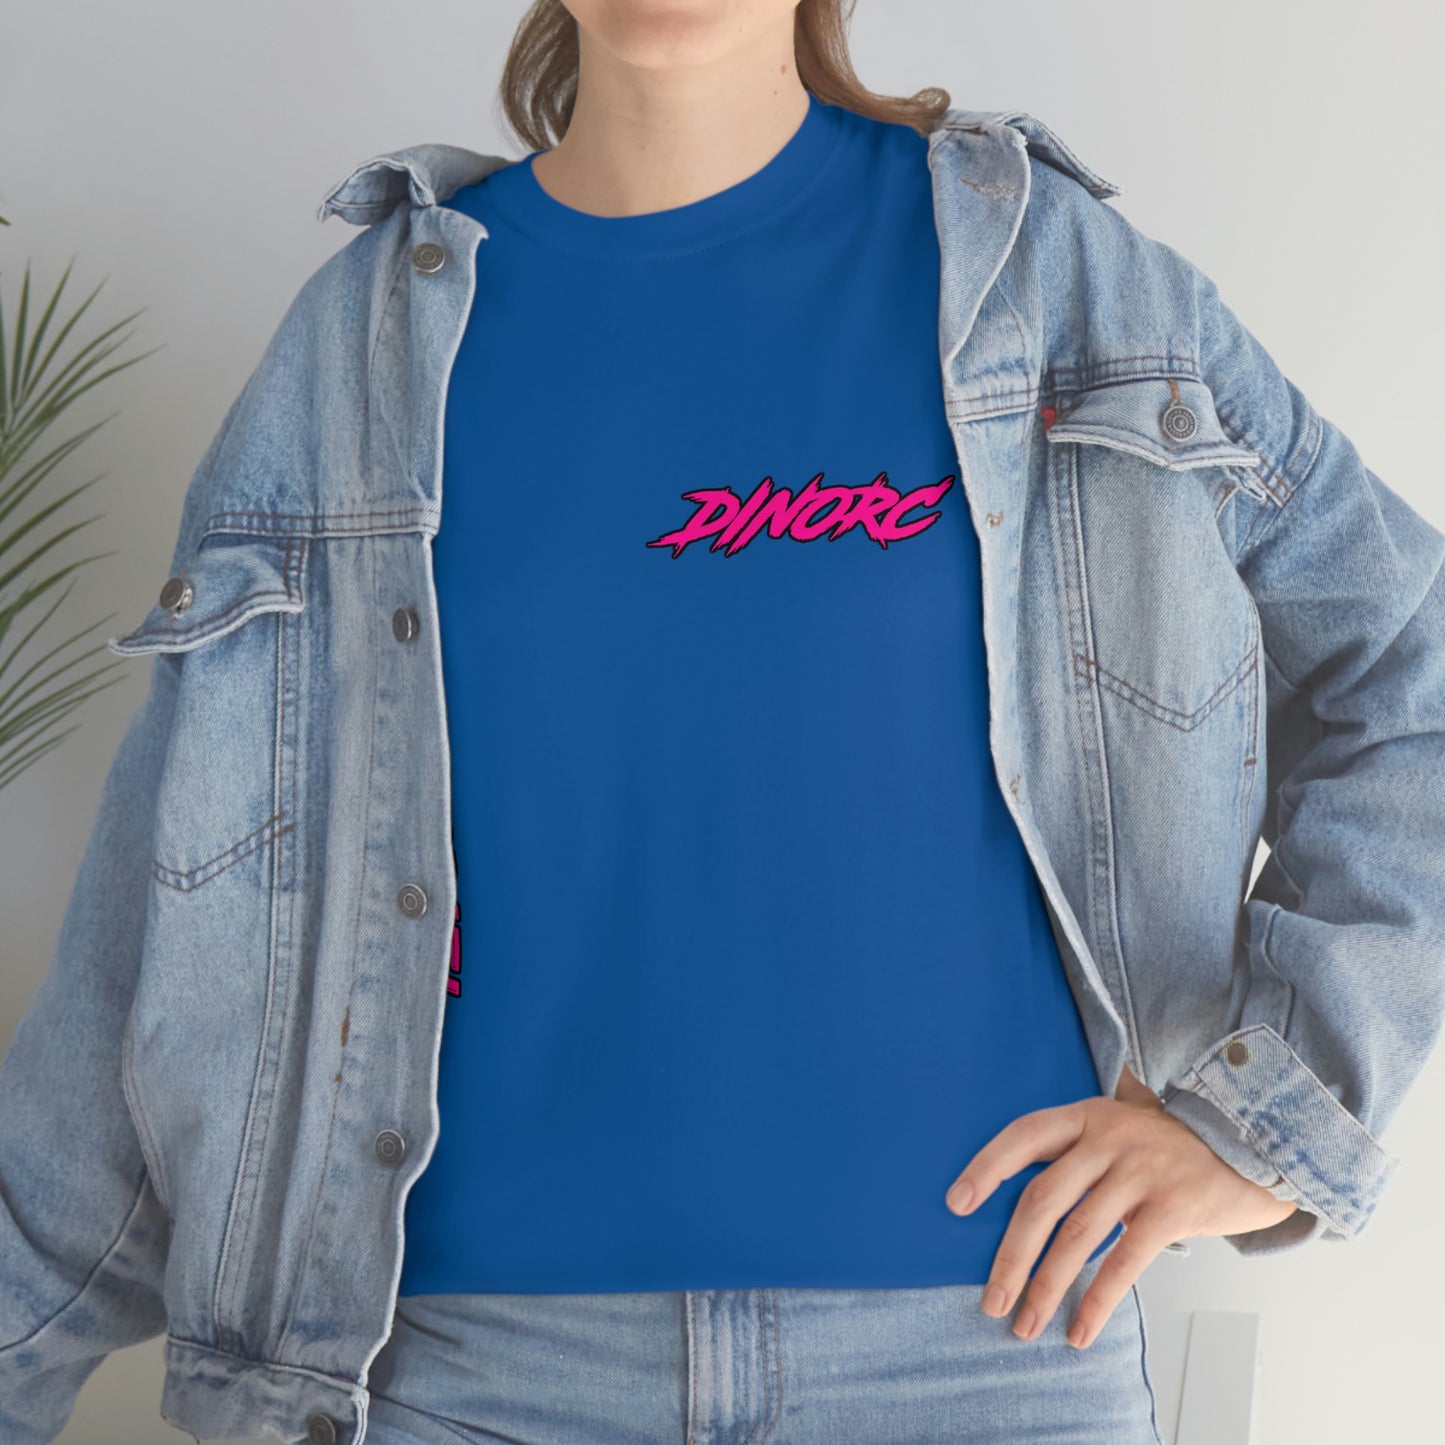 Vertical Team Driver Dino's Divas Front and Back DinoRc Logo T-Shirt S-5x 5 colors